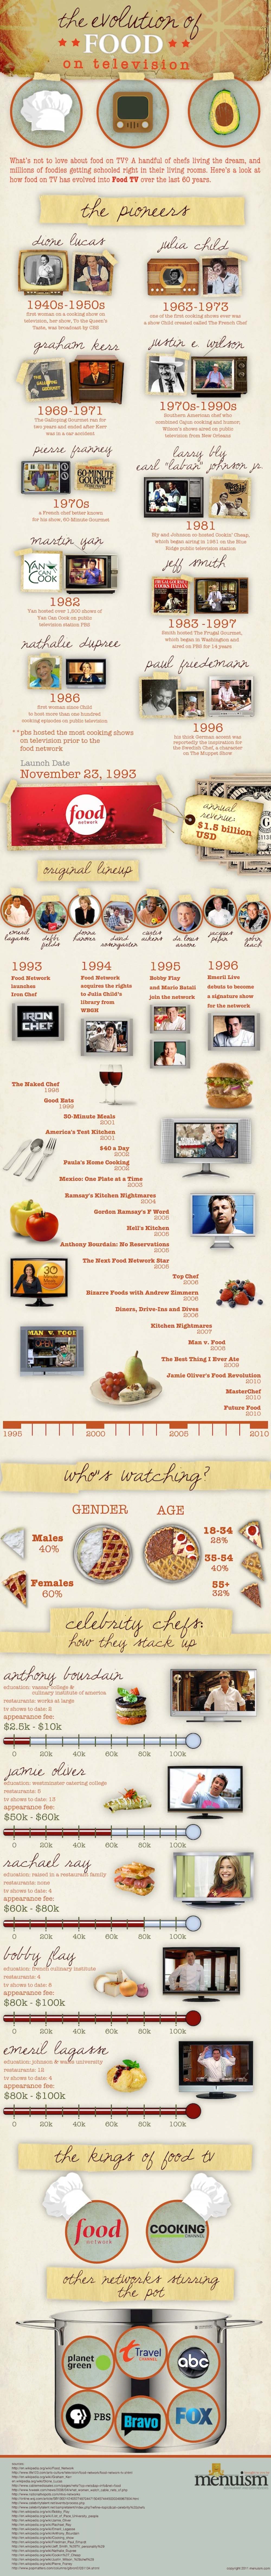 The Evolution of Food on TV